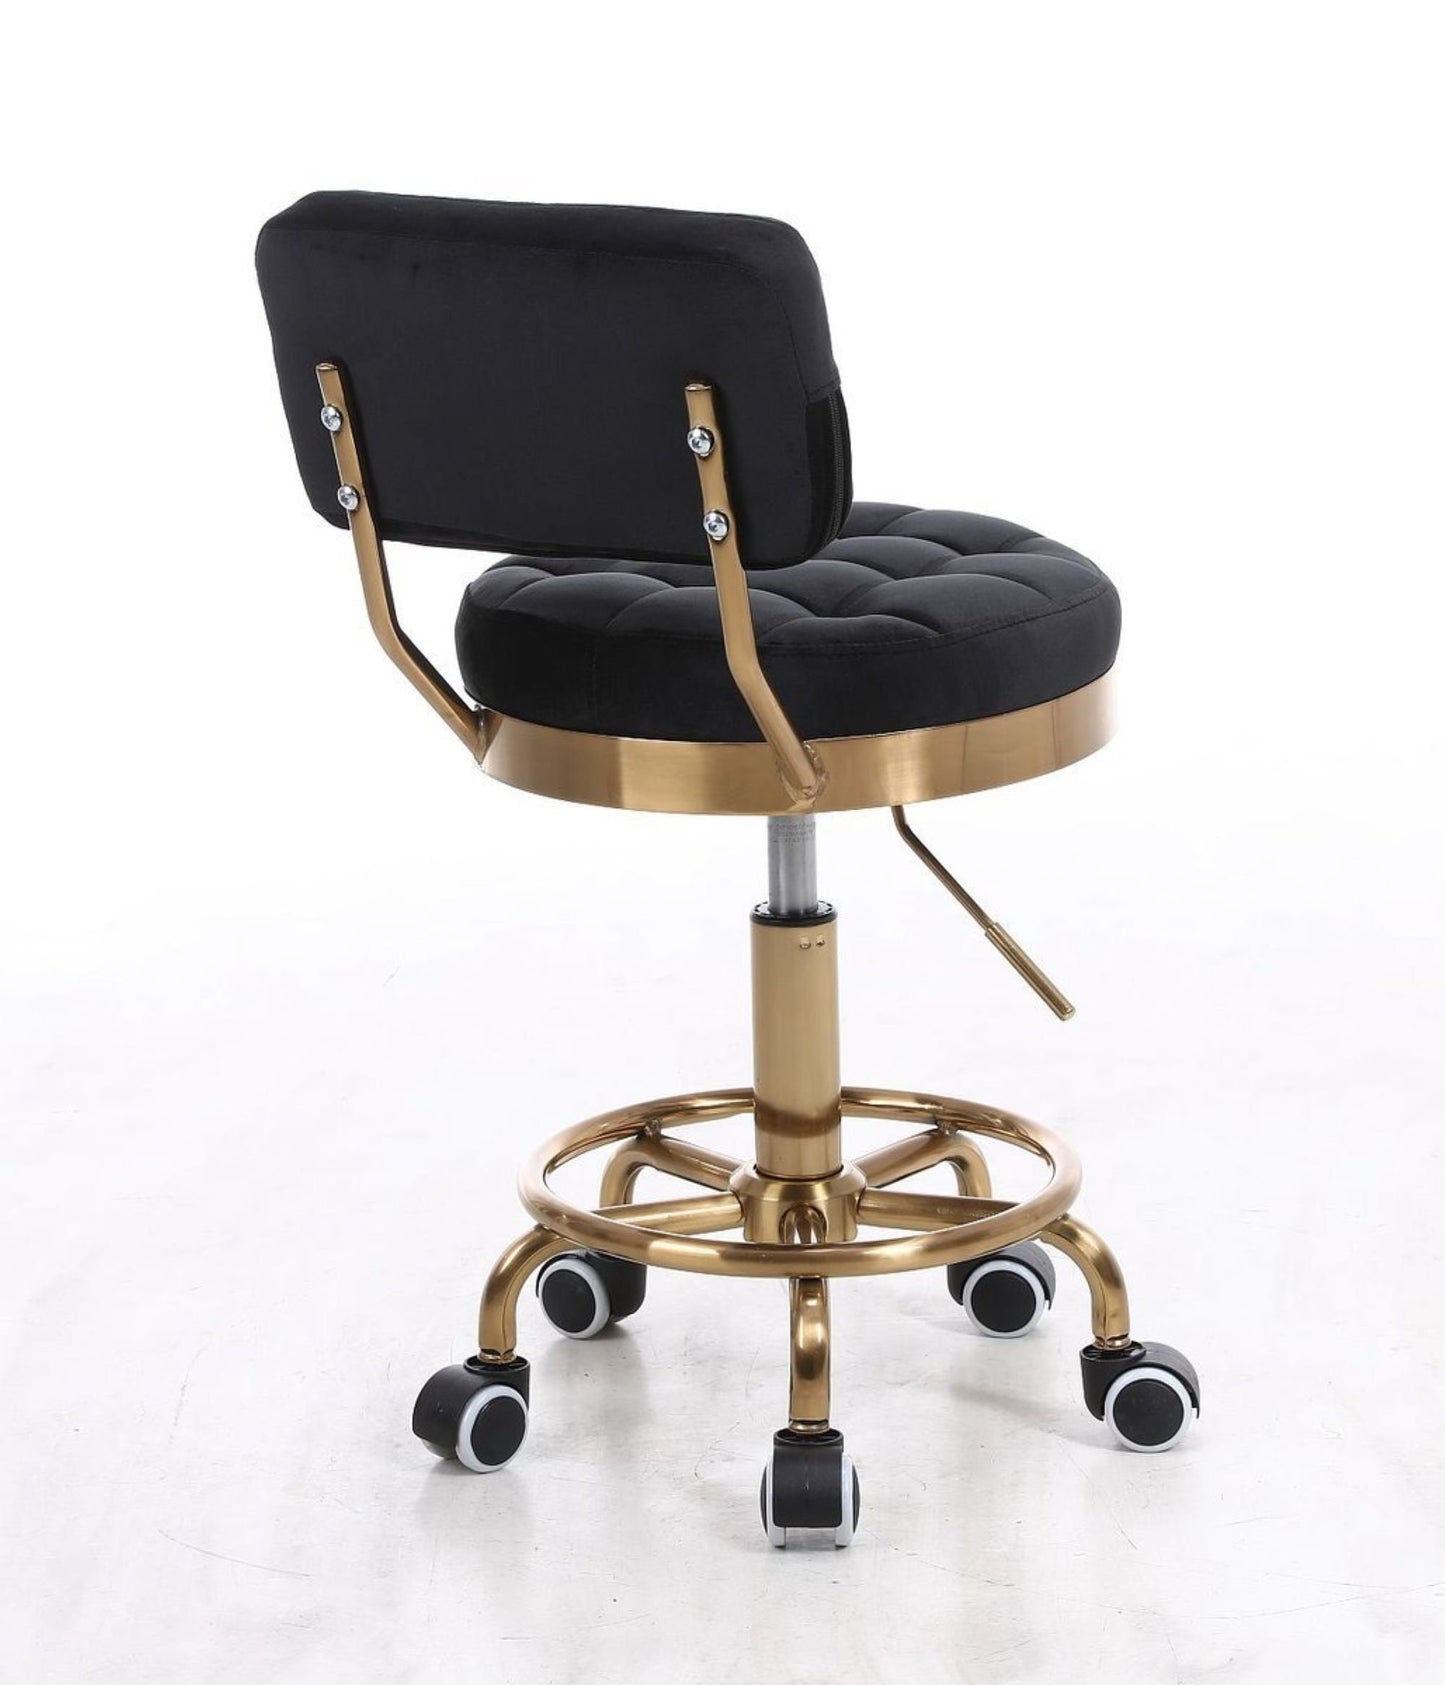 Beautiful & stylish Designer adjustable swivel office/desk hairdresser chair with gold base in velvet or leather Many Colours